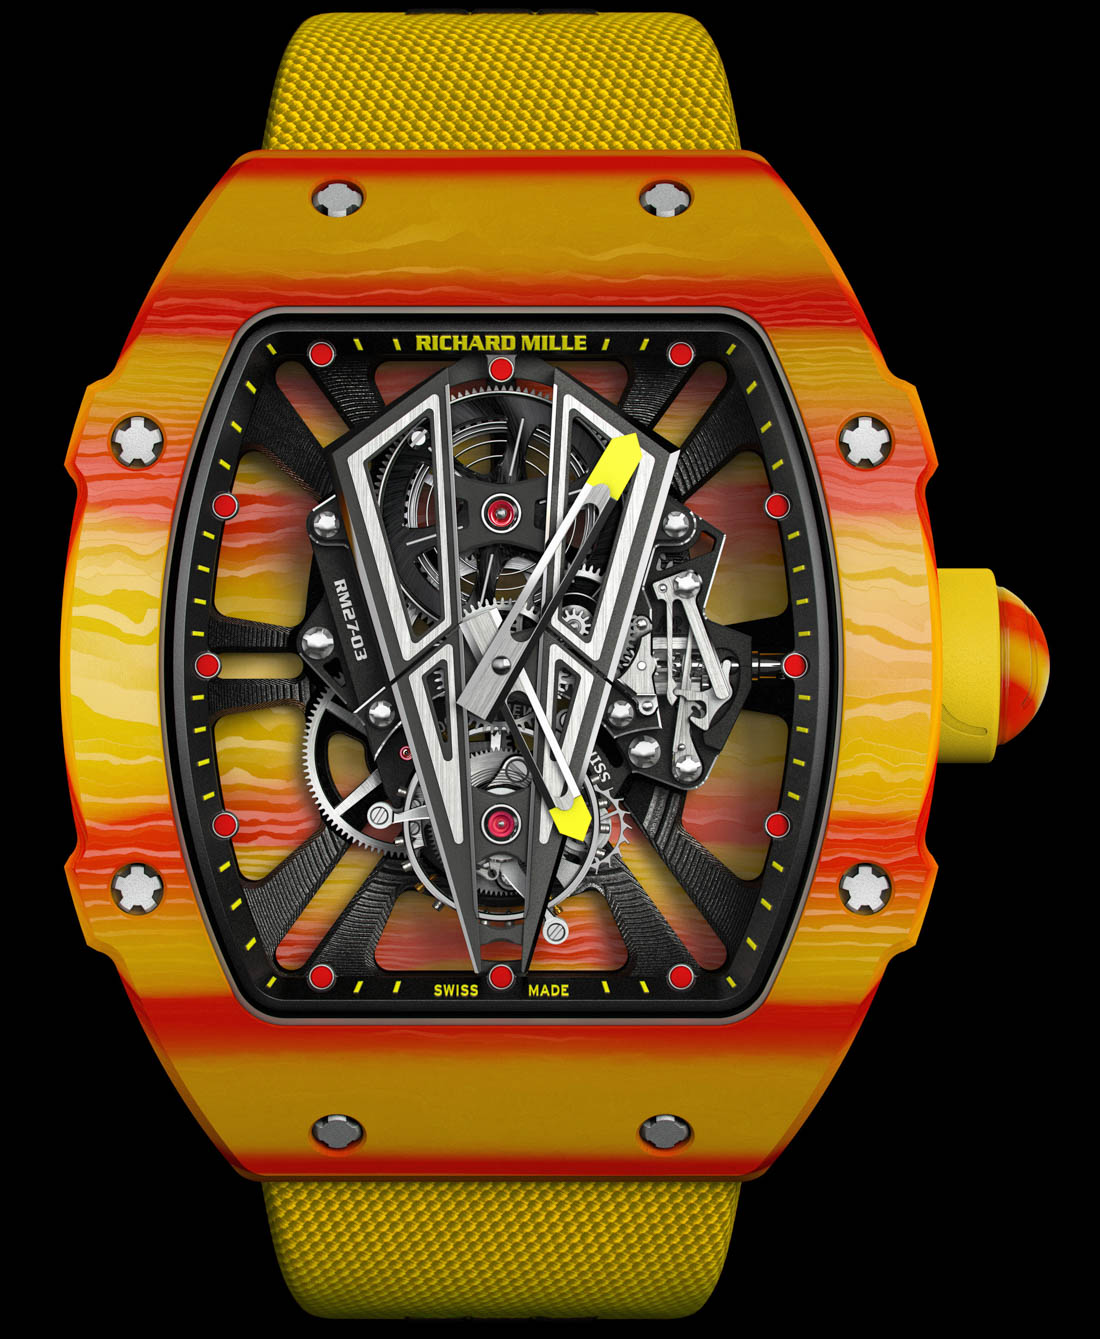 Richard Mille Rm 27 03 Rafael Nadal Watch With A Tourbillon To Withstand 10 000 G S Page 2 Of 2 Ablogtowatch